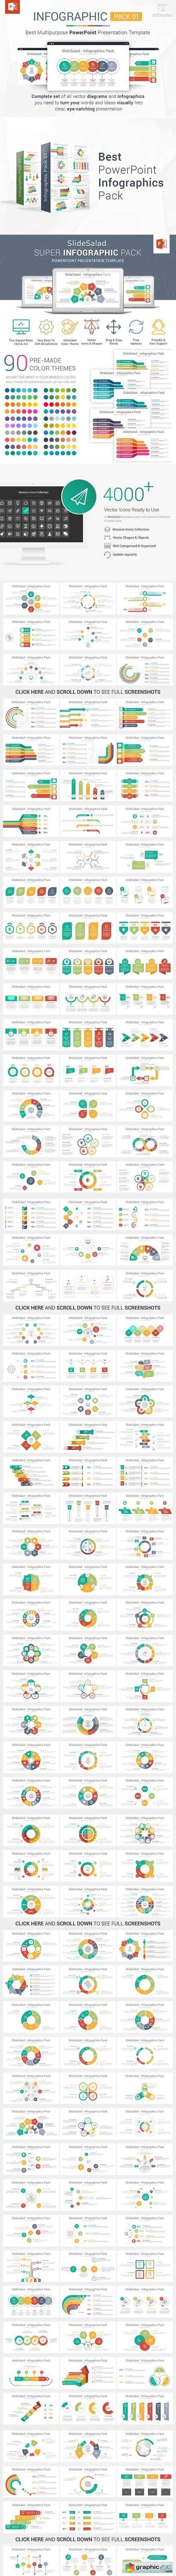 Best PowerPoint Infographics Pack